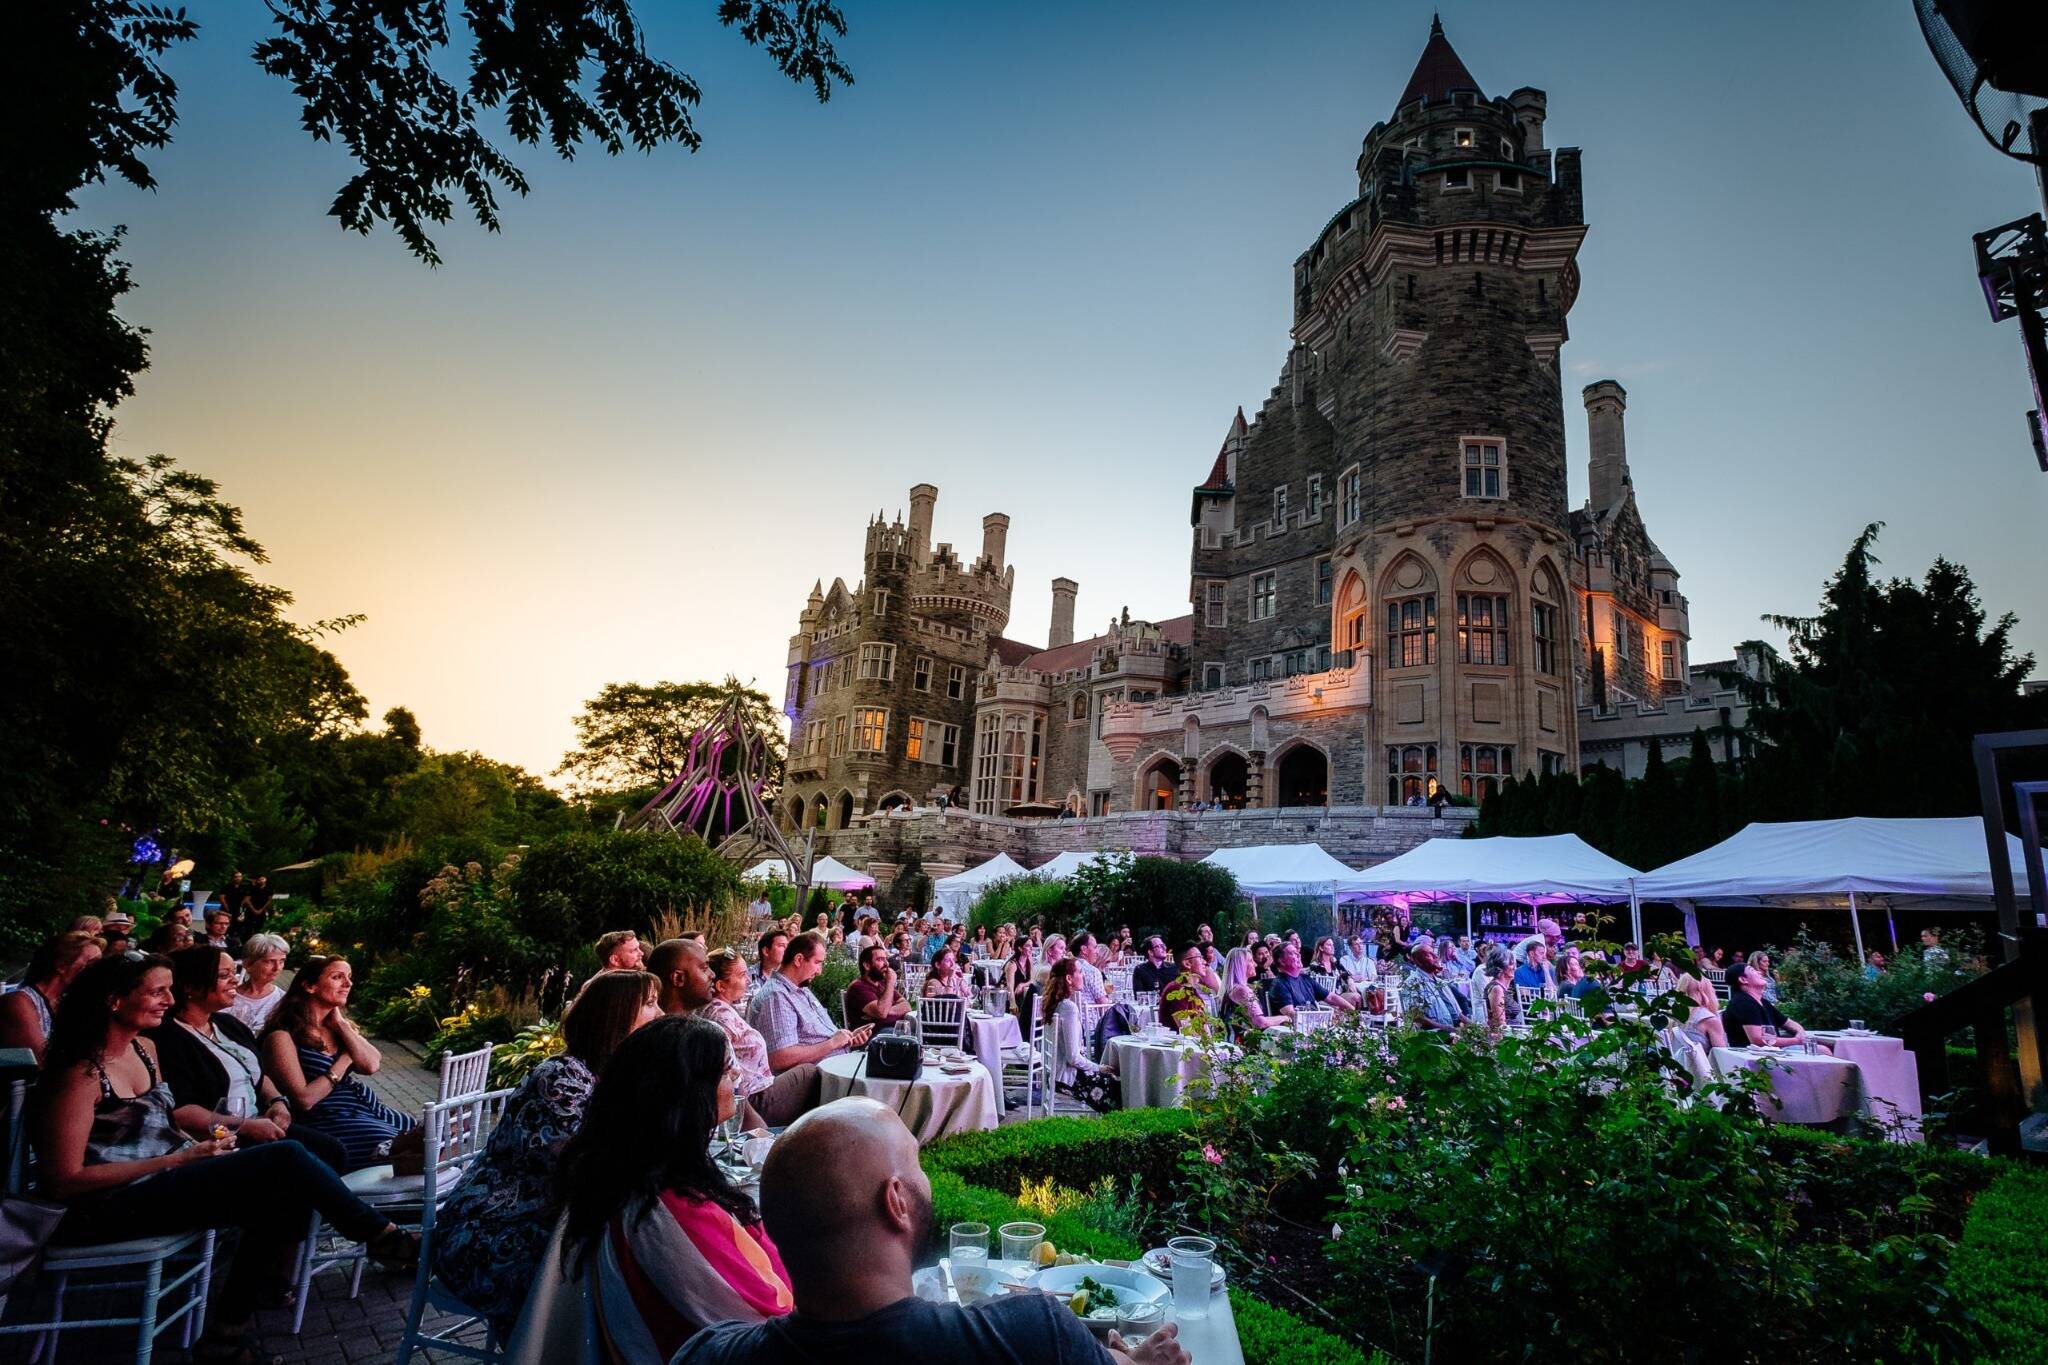 You can listen to music in the gardens at Casa Loma every Monday night